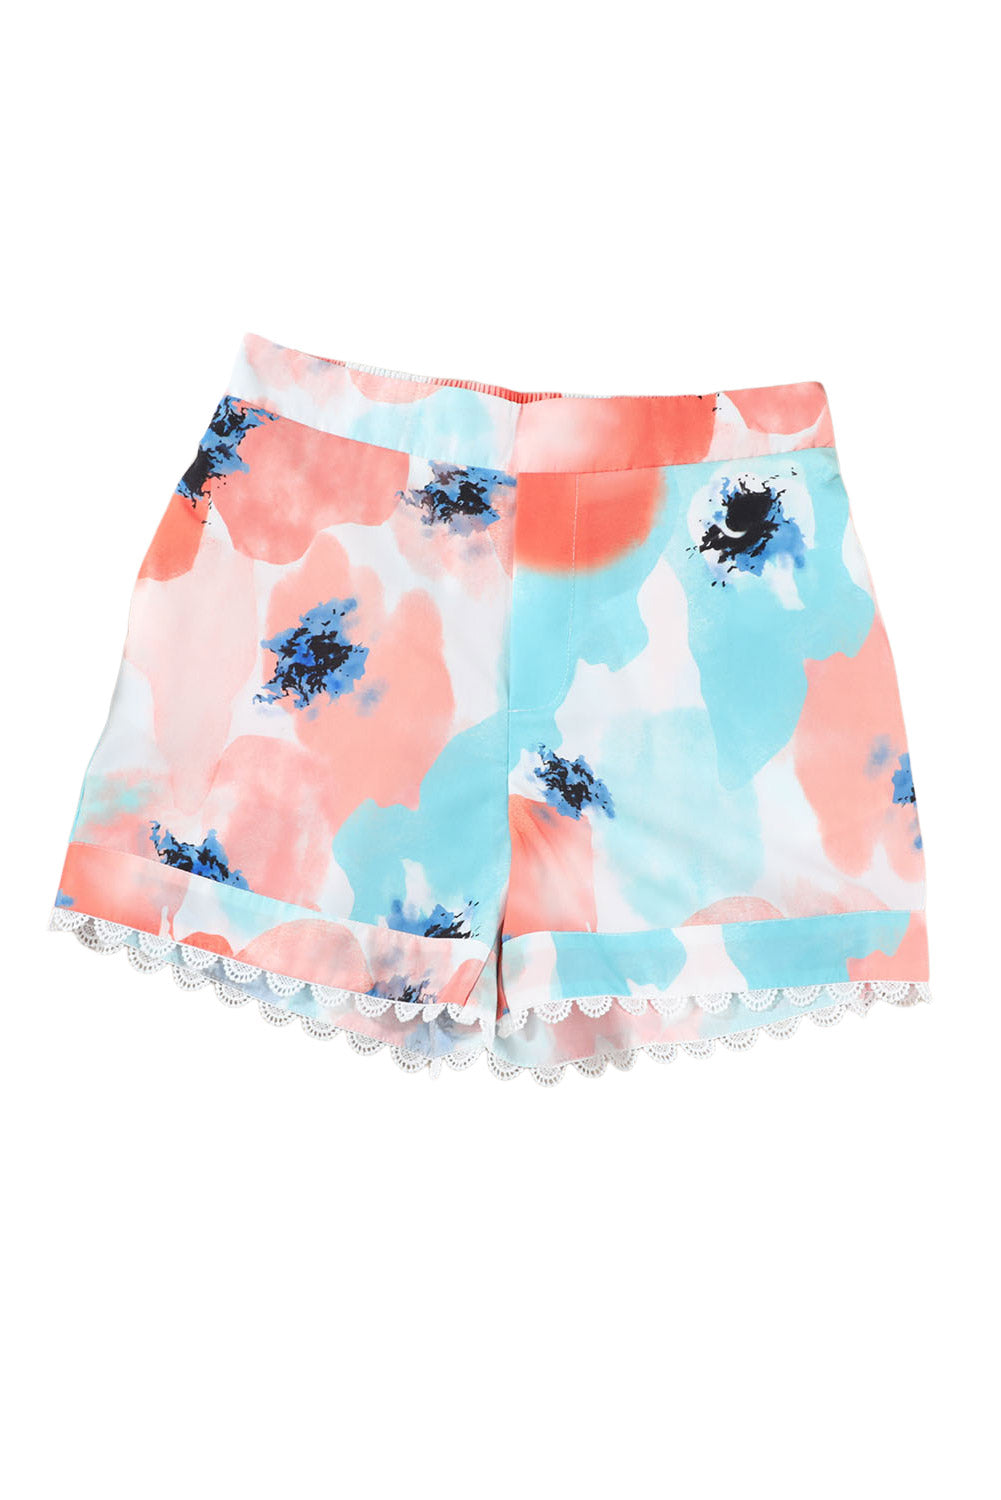 Abstract Water Marbling Print Lace Trim Shorts